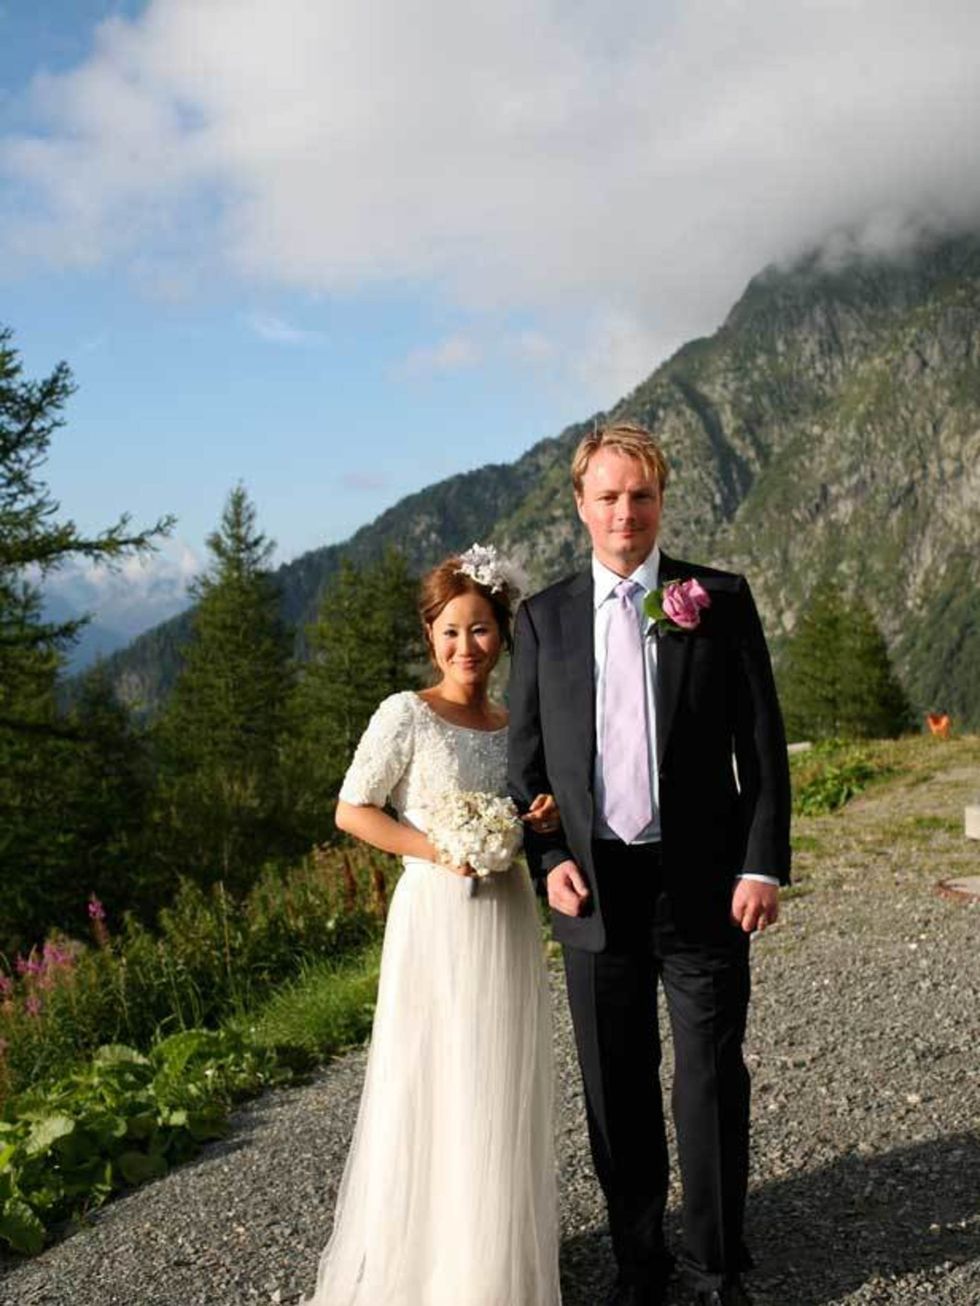 <p>Carolyn Asome, deputy Fashion Editor at The Times, in a Elspeth Gibson/Lisa Redman dress on her wedding day in Chamonix, France, 2007 </p><p> </p>